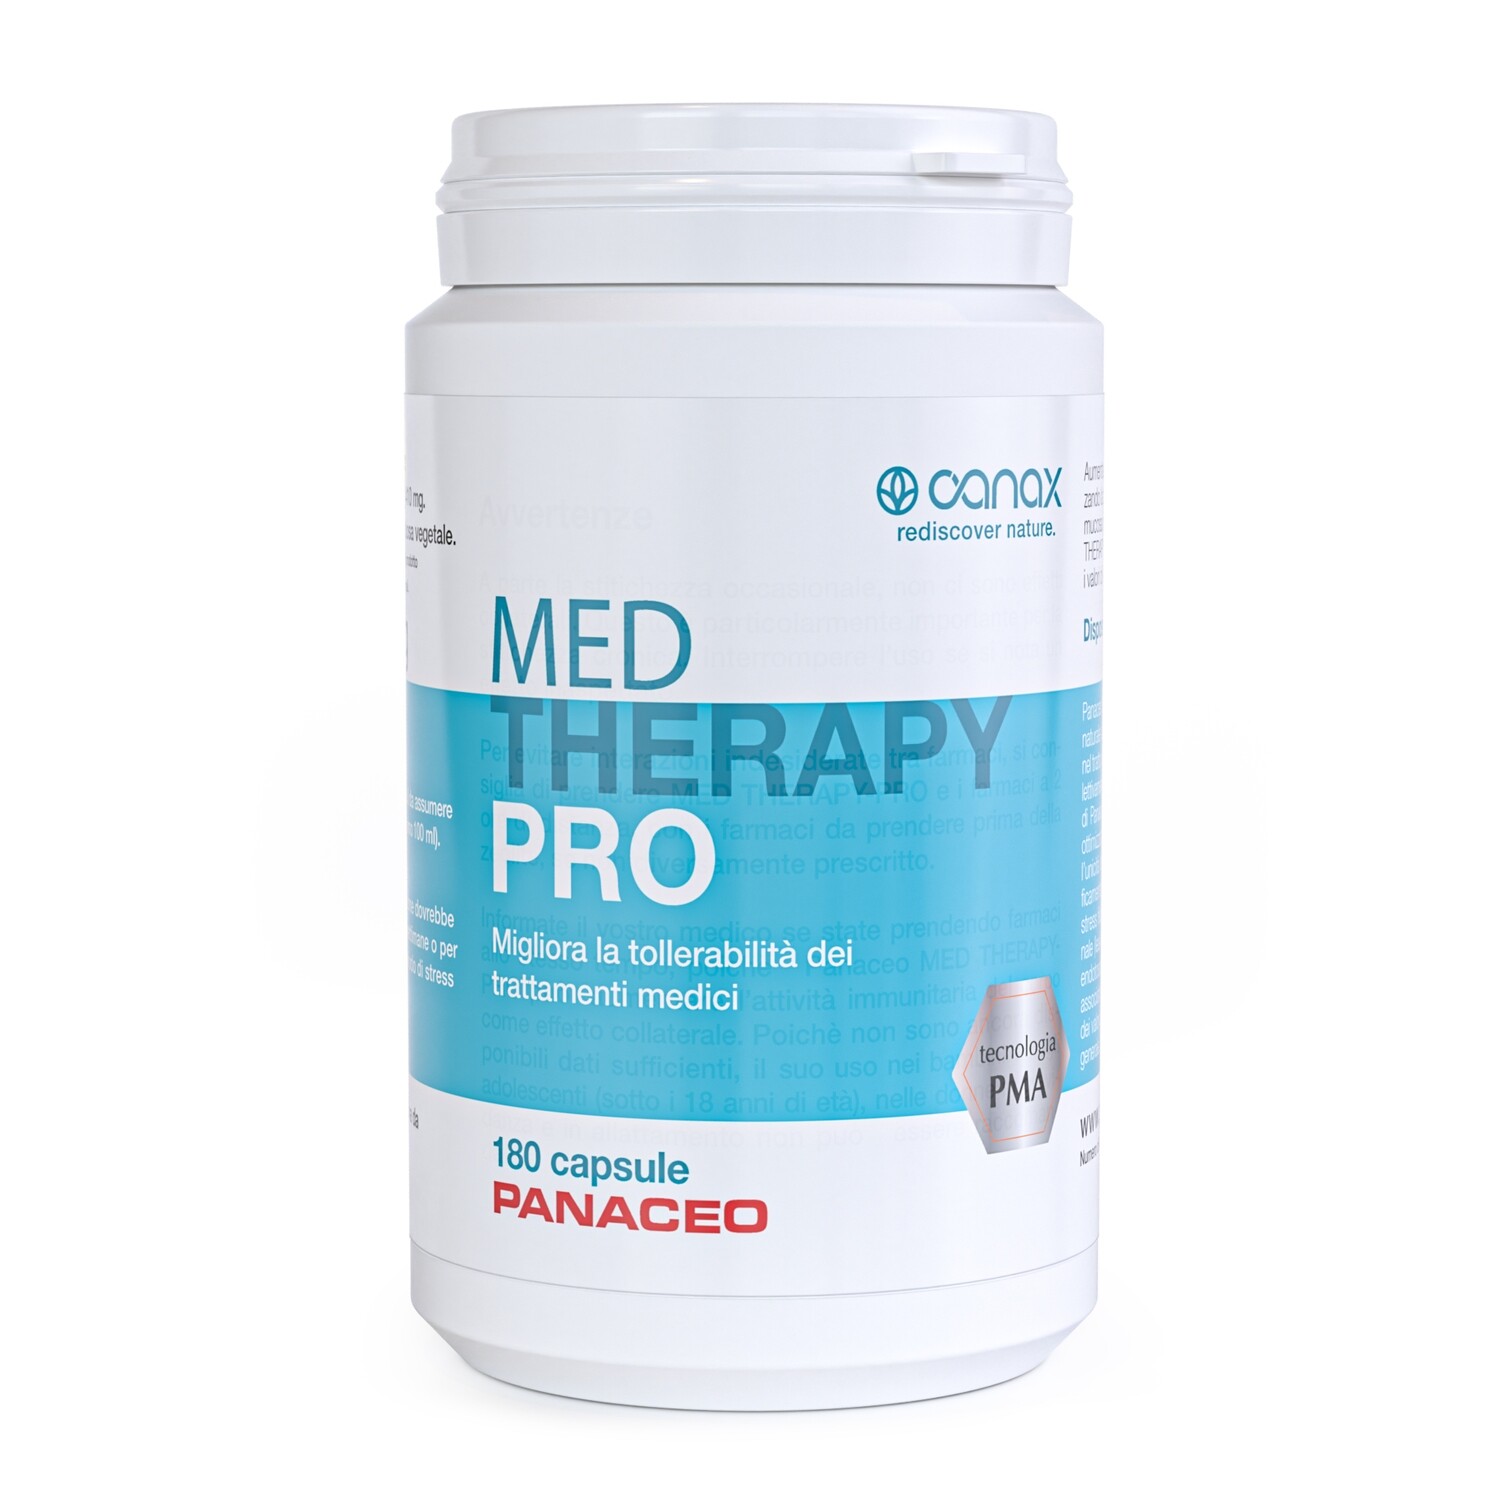 MED THERAPY PRO 180 capsule